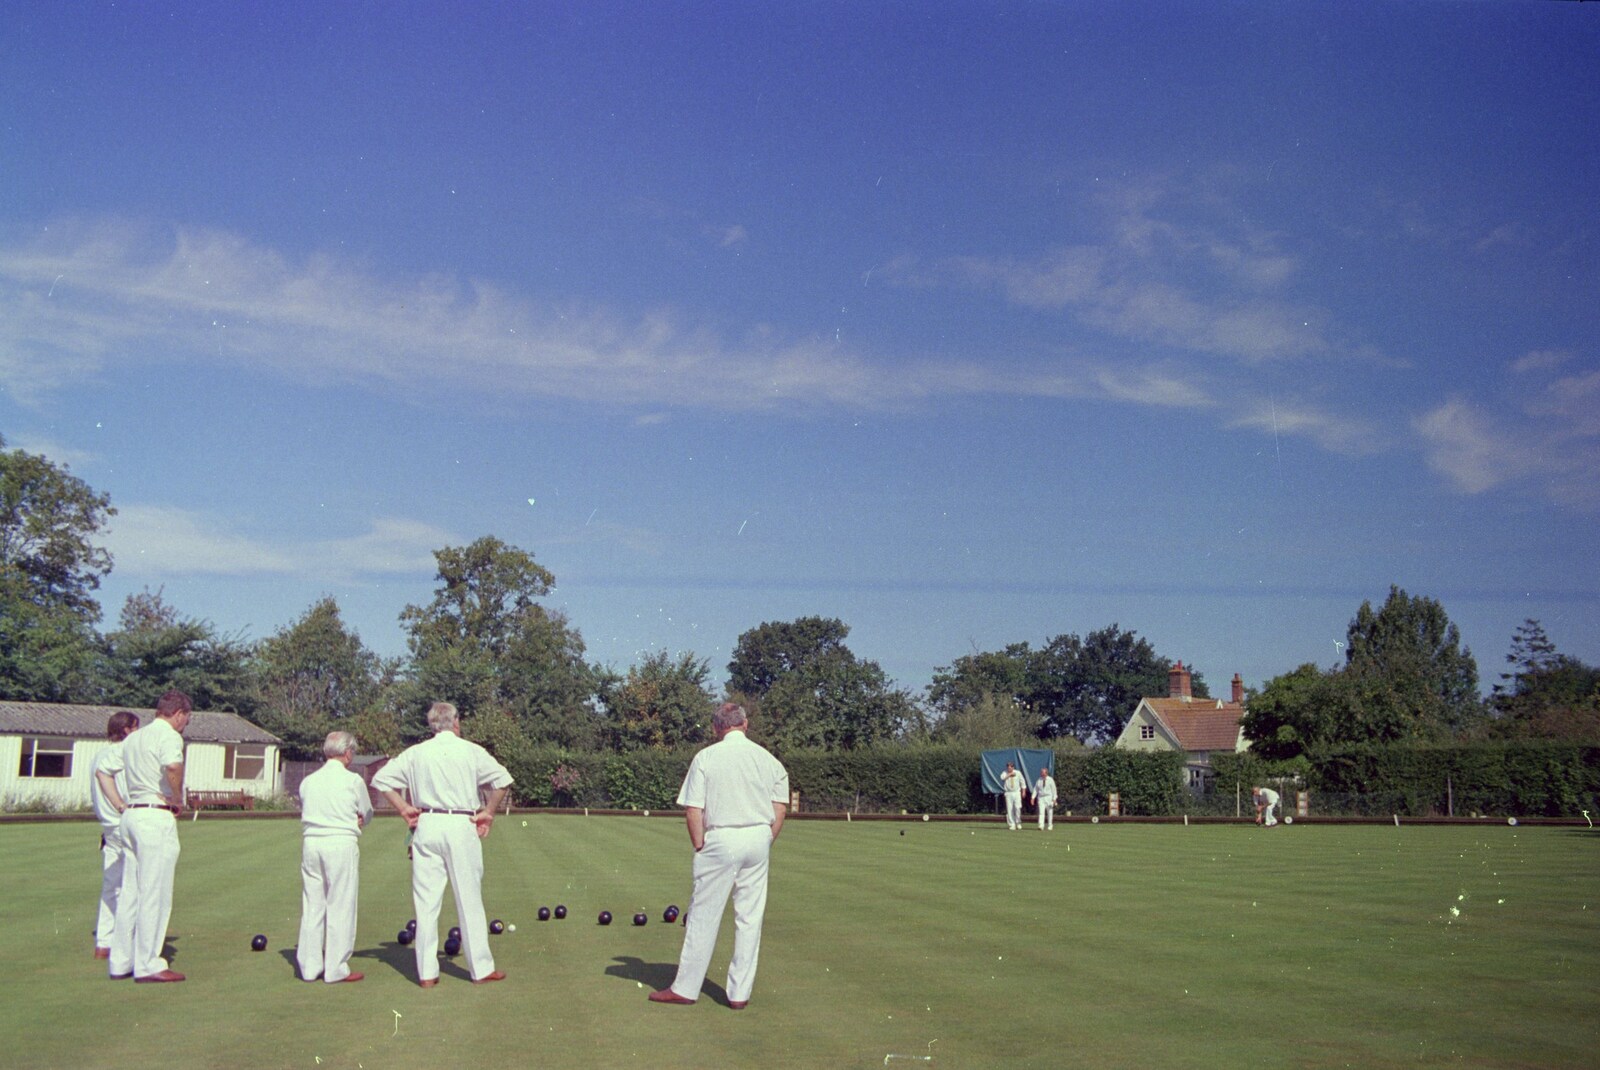 The action down at the Eye Bowls Club from Cider Making With Geoff and Brenda, Stuston, Suffolk - 10th September 1998